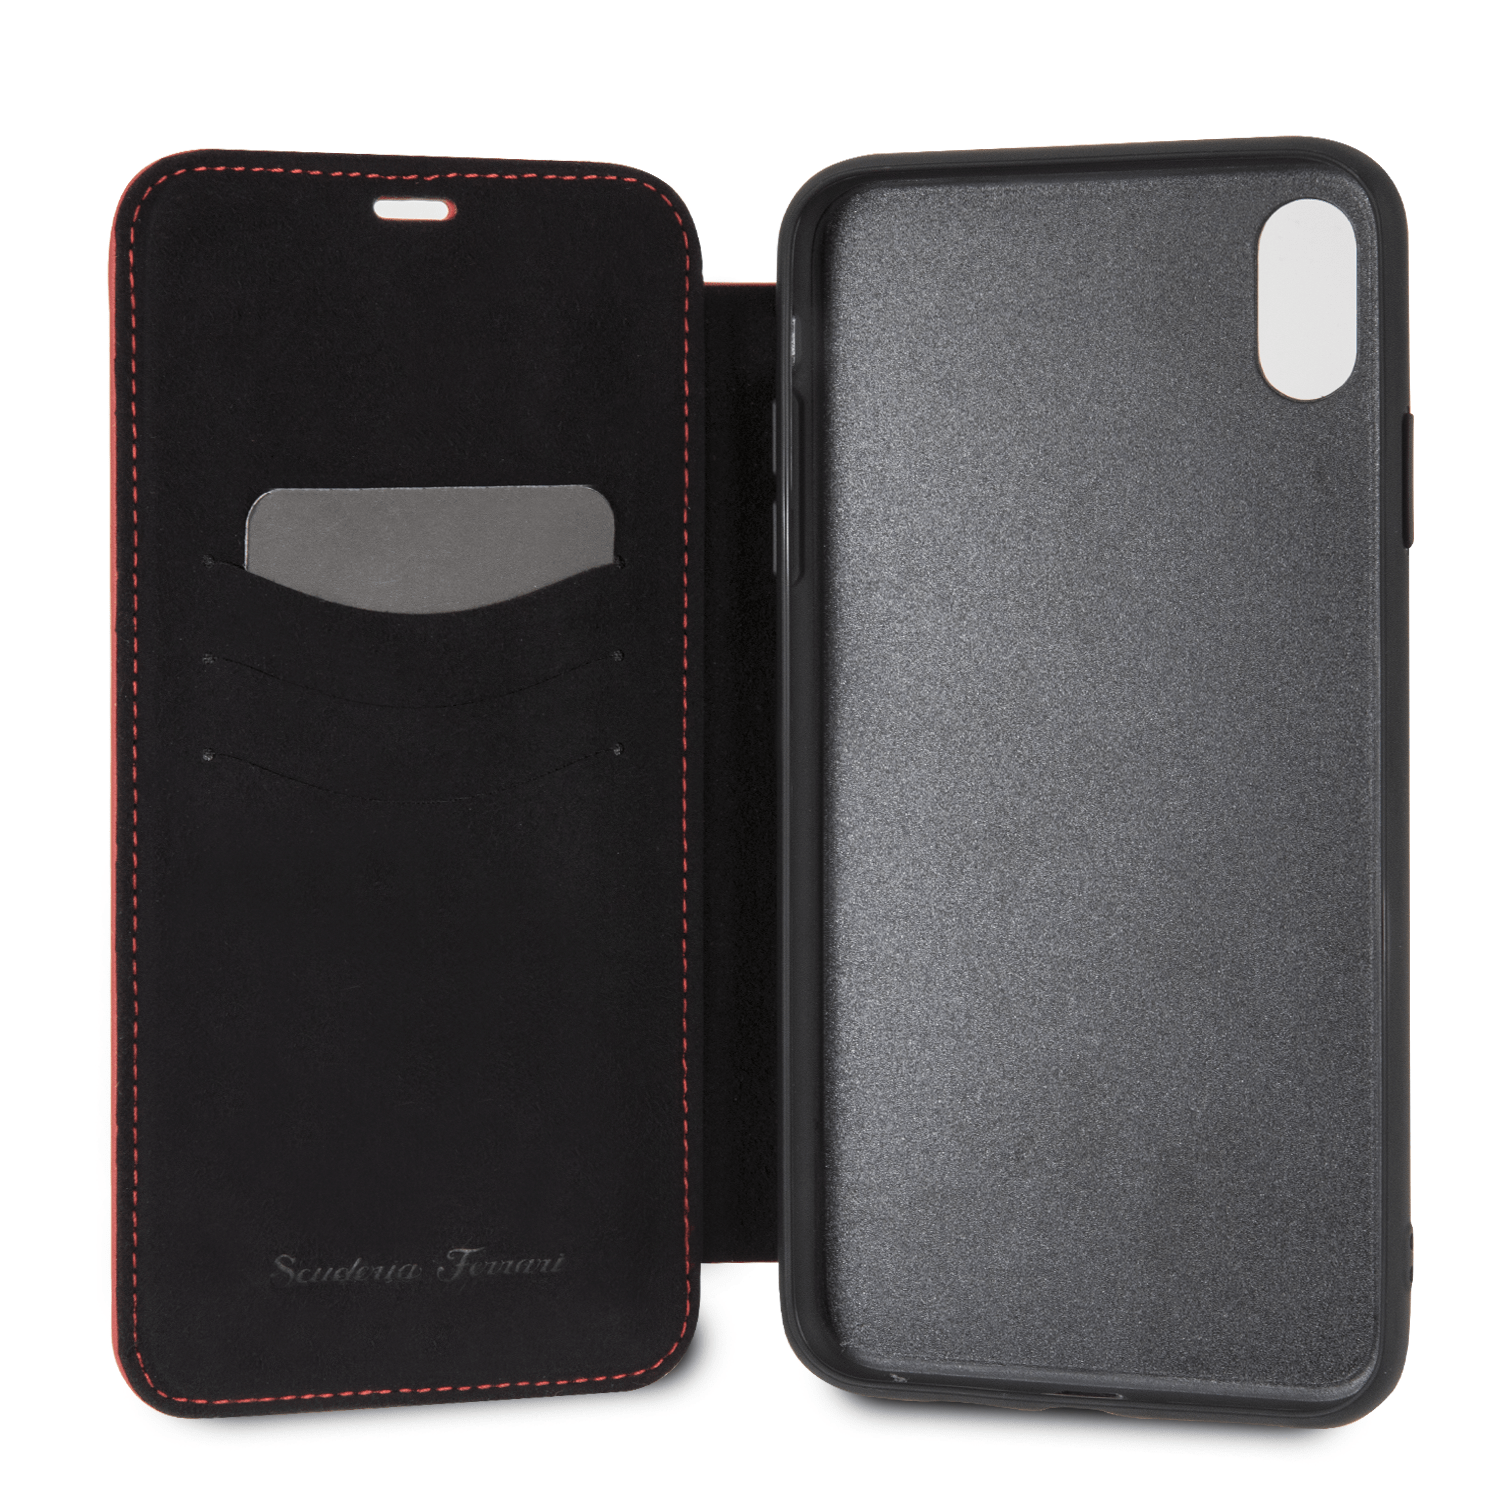  Safeguard your personal device in luxurious style with this genuine leather case, featuring the signature design excellence synonymous with Ferrari Auto